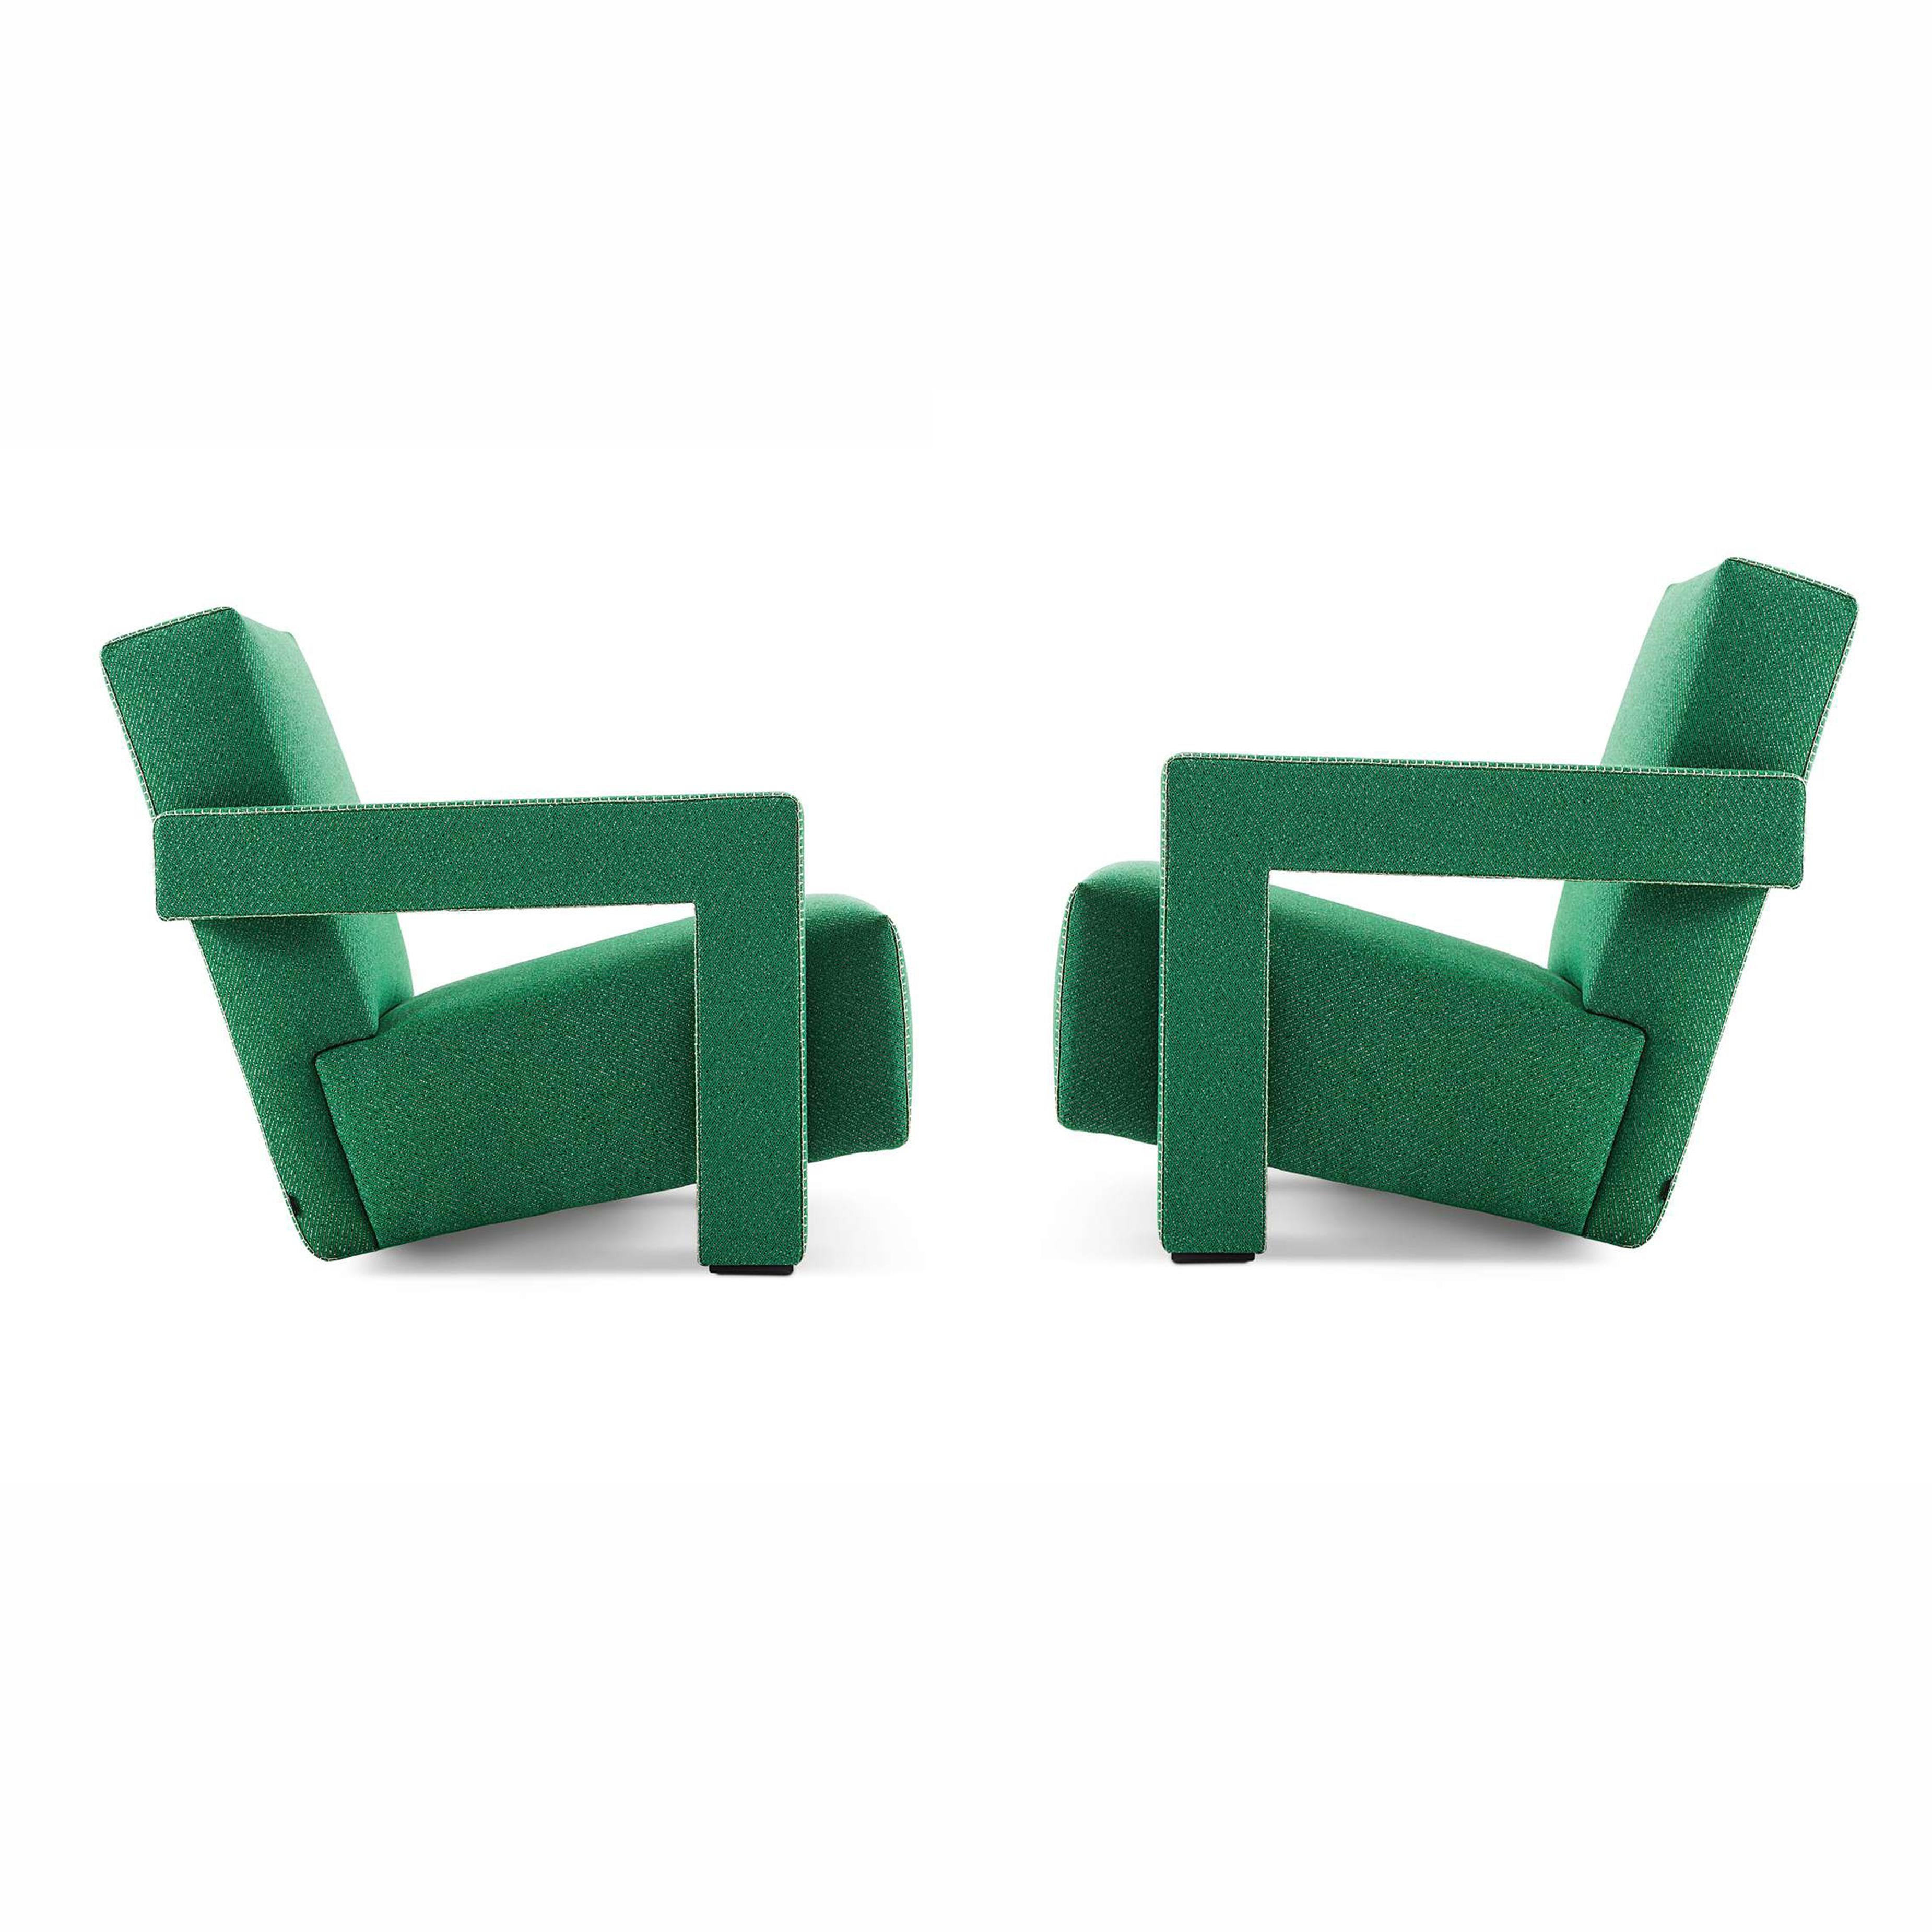 Set of Two Utrech Armchair by Gerrit Thomas Rietveld for Cassina In New Condition For Sale In Barcelona, Barcelona